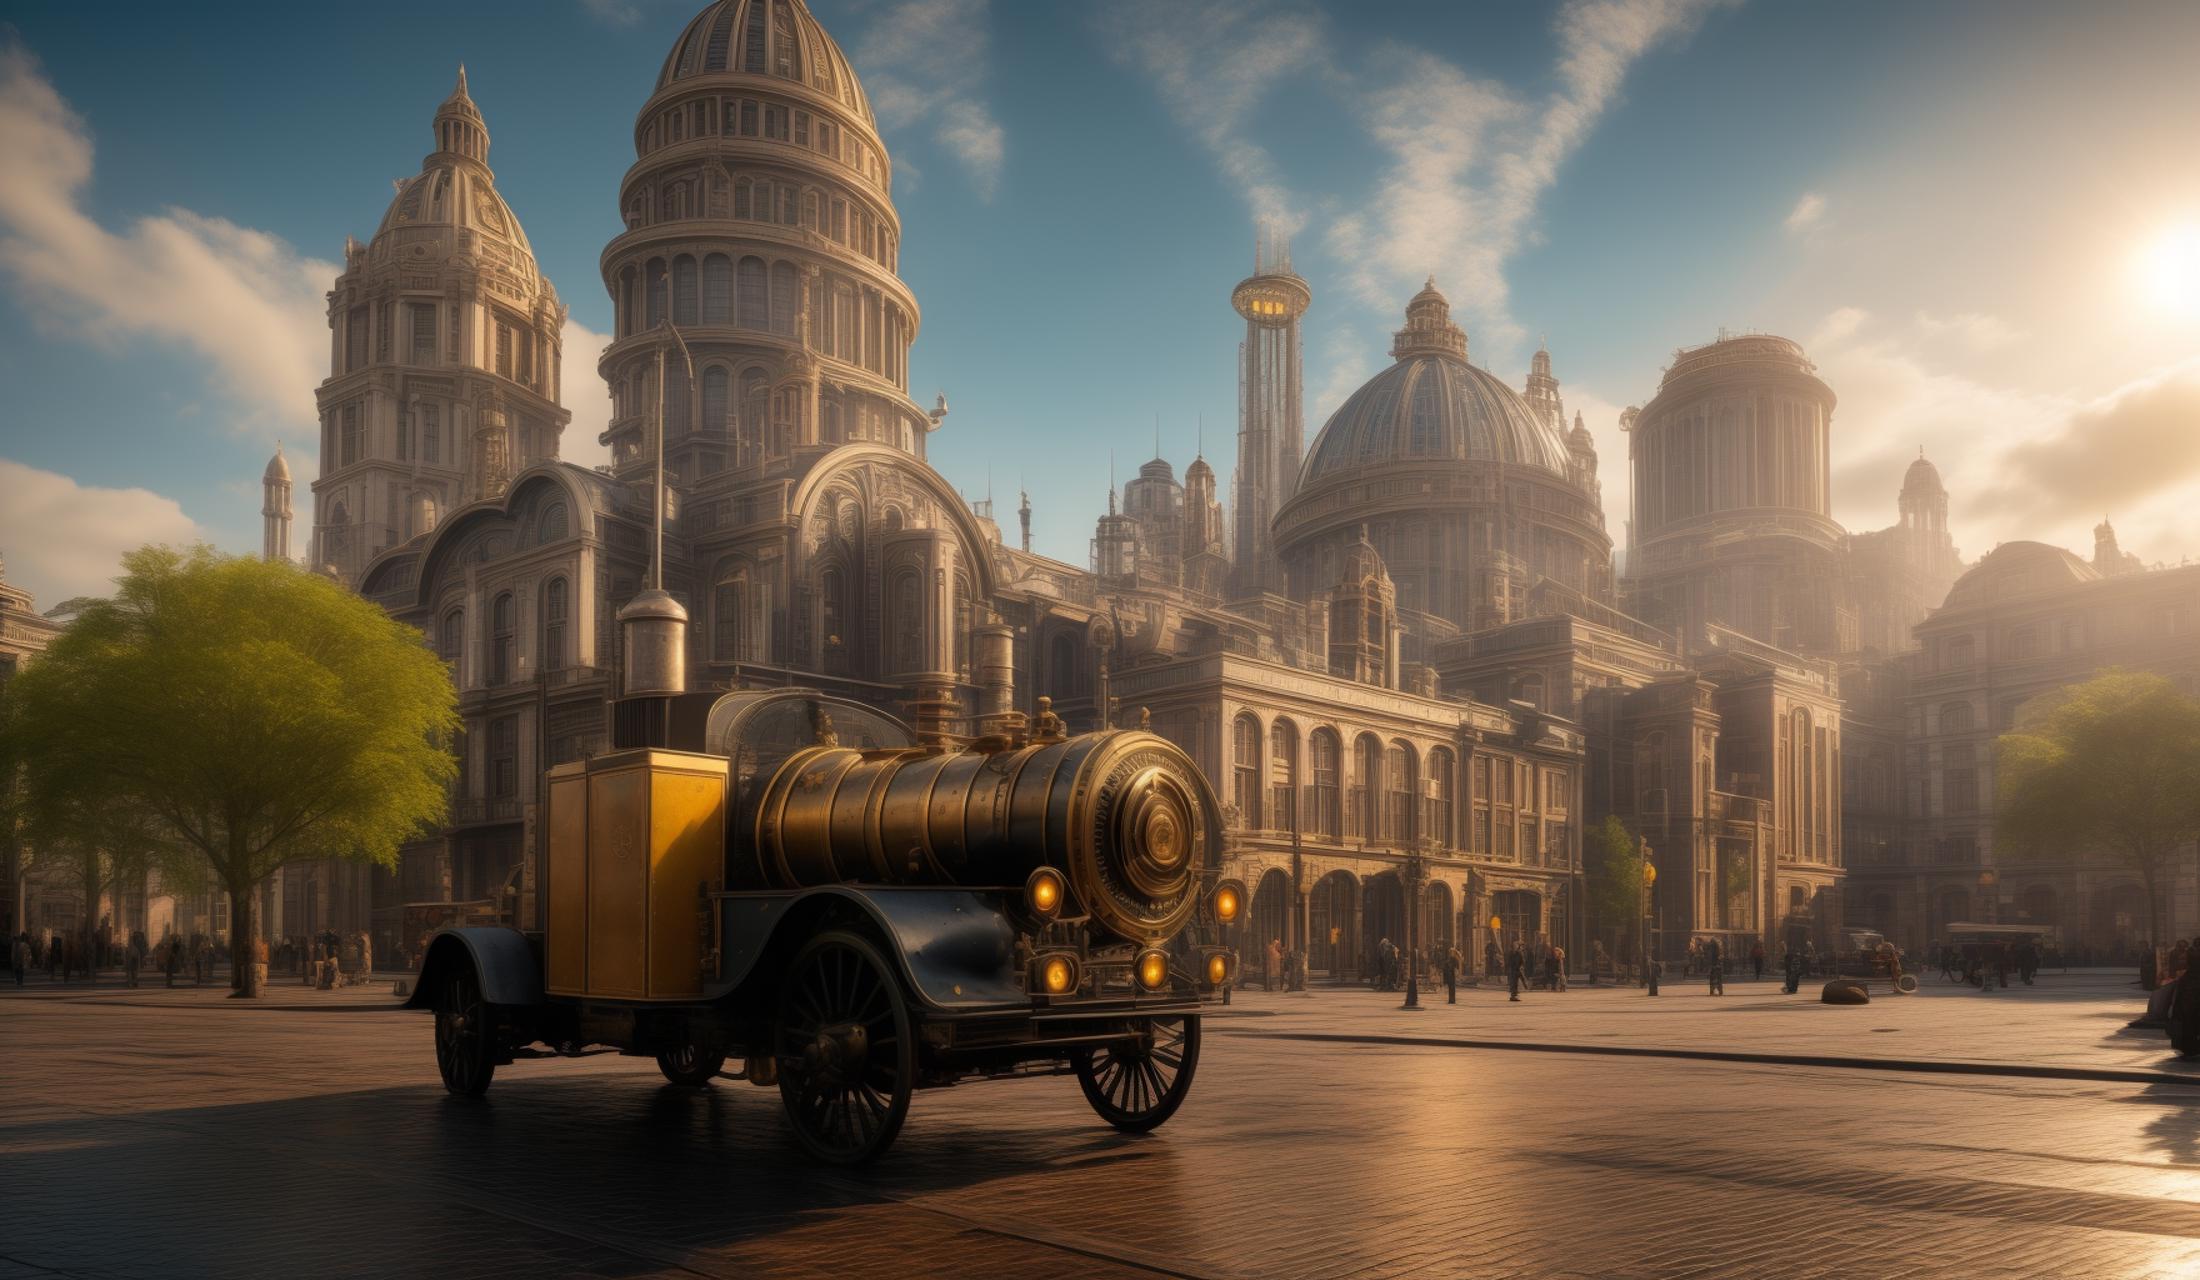 JJ's Building style - Steampunk image by jjhuang